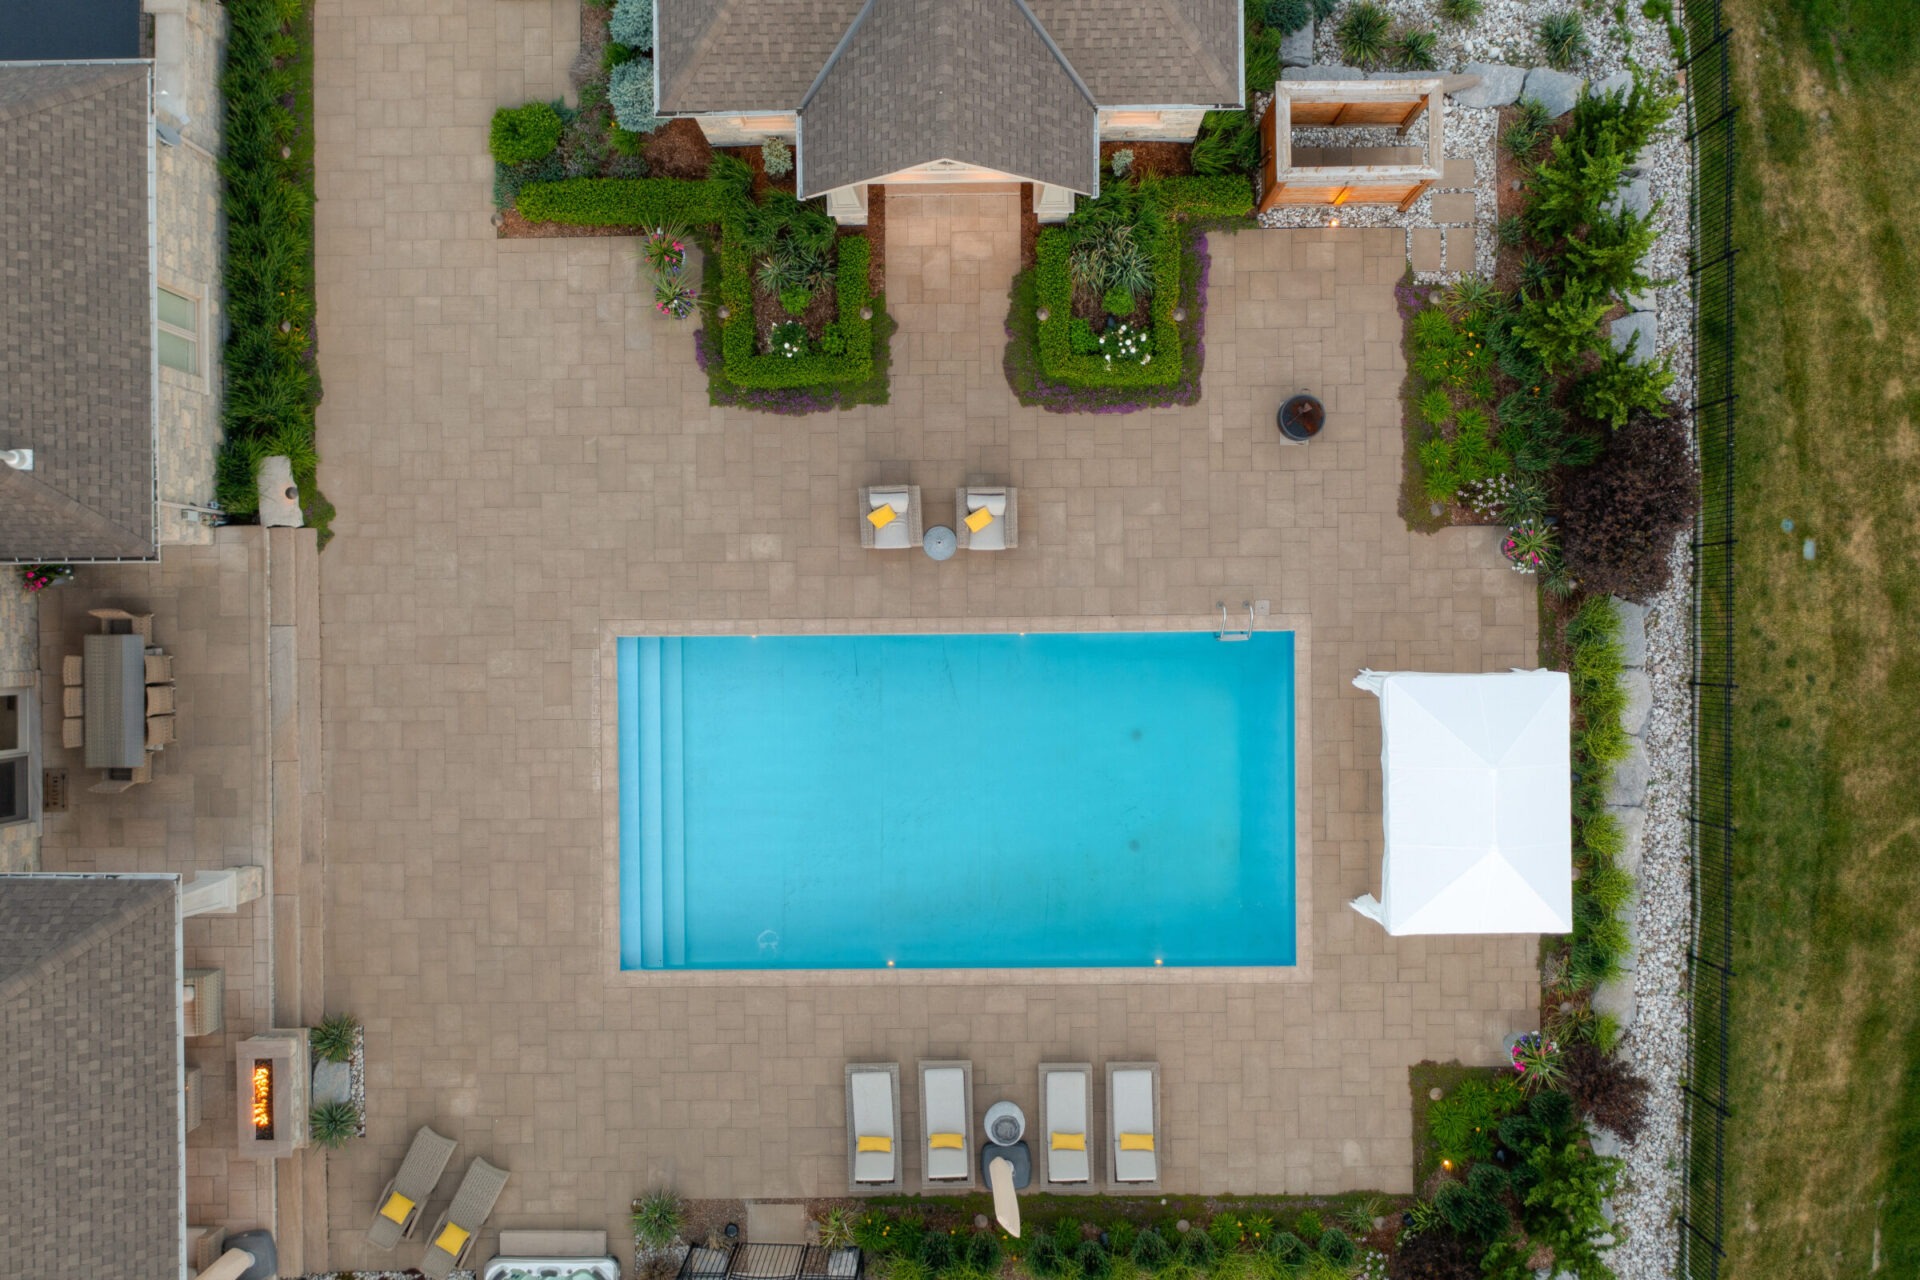 Aerial view of a backyard with a large rectangular swimming pool, paved area, sun loungers, manicured gardens, and a small outdoor structure.